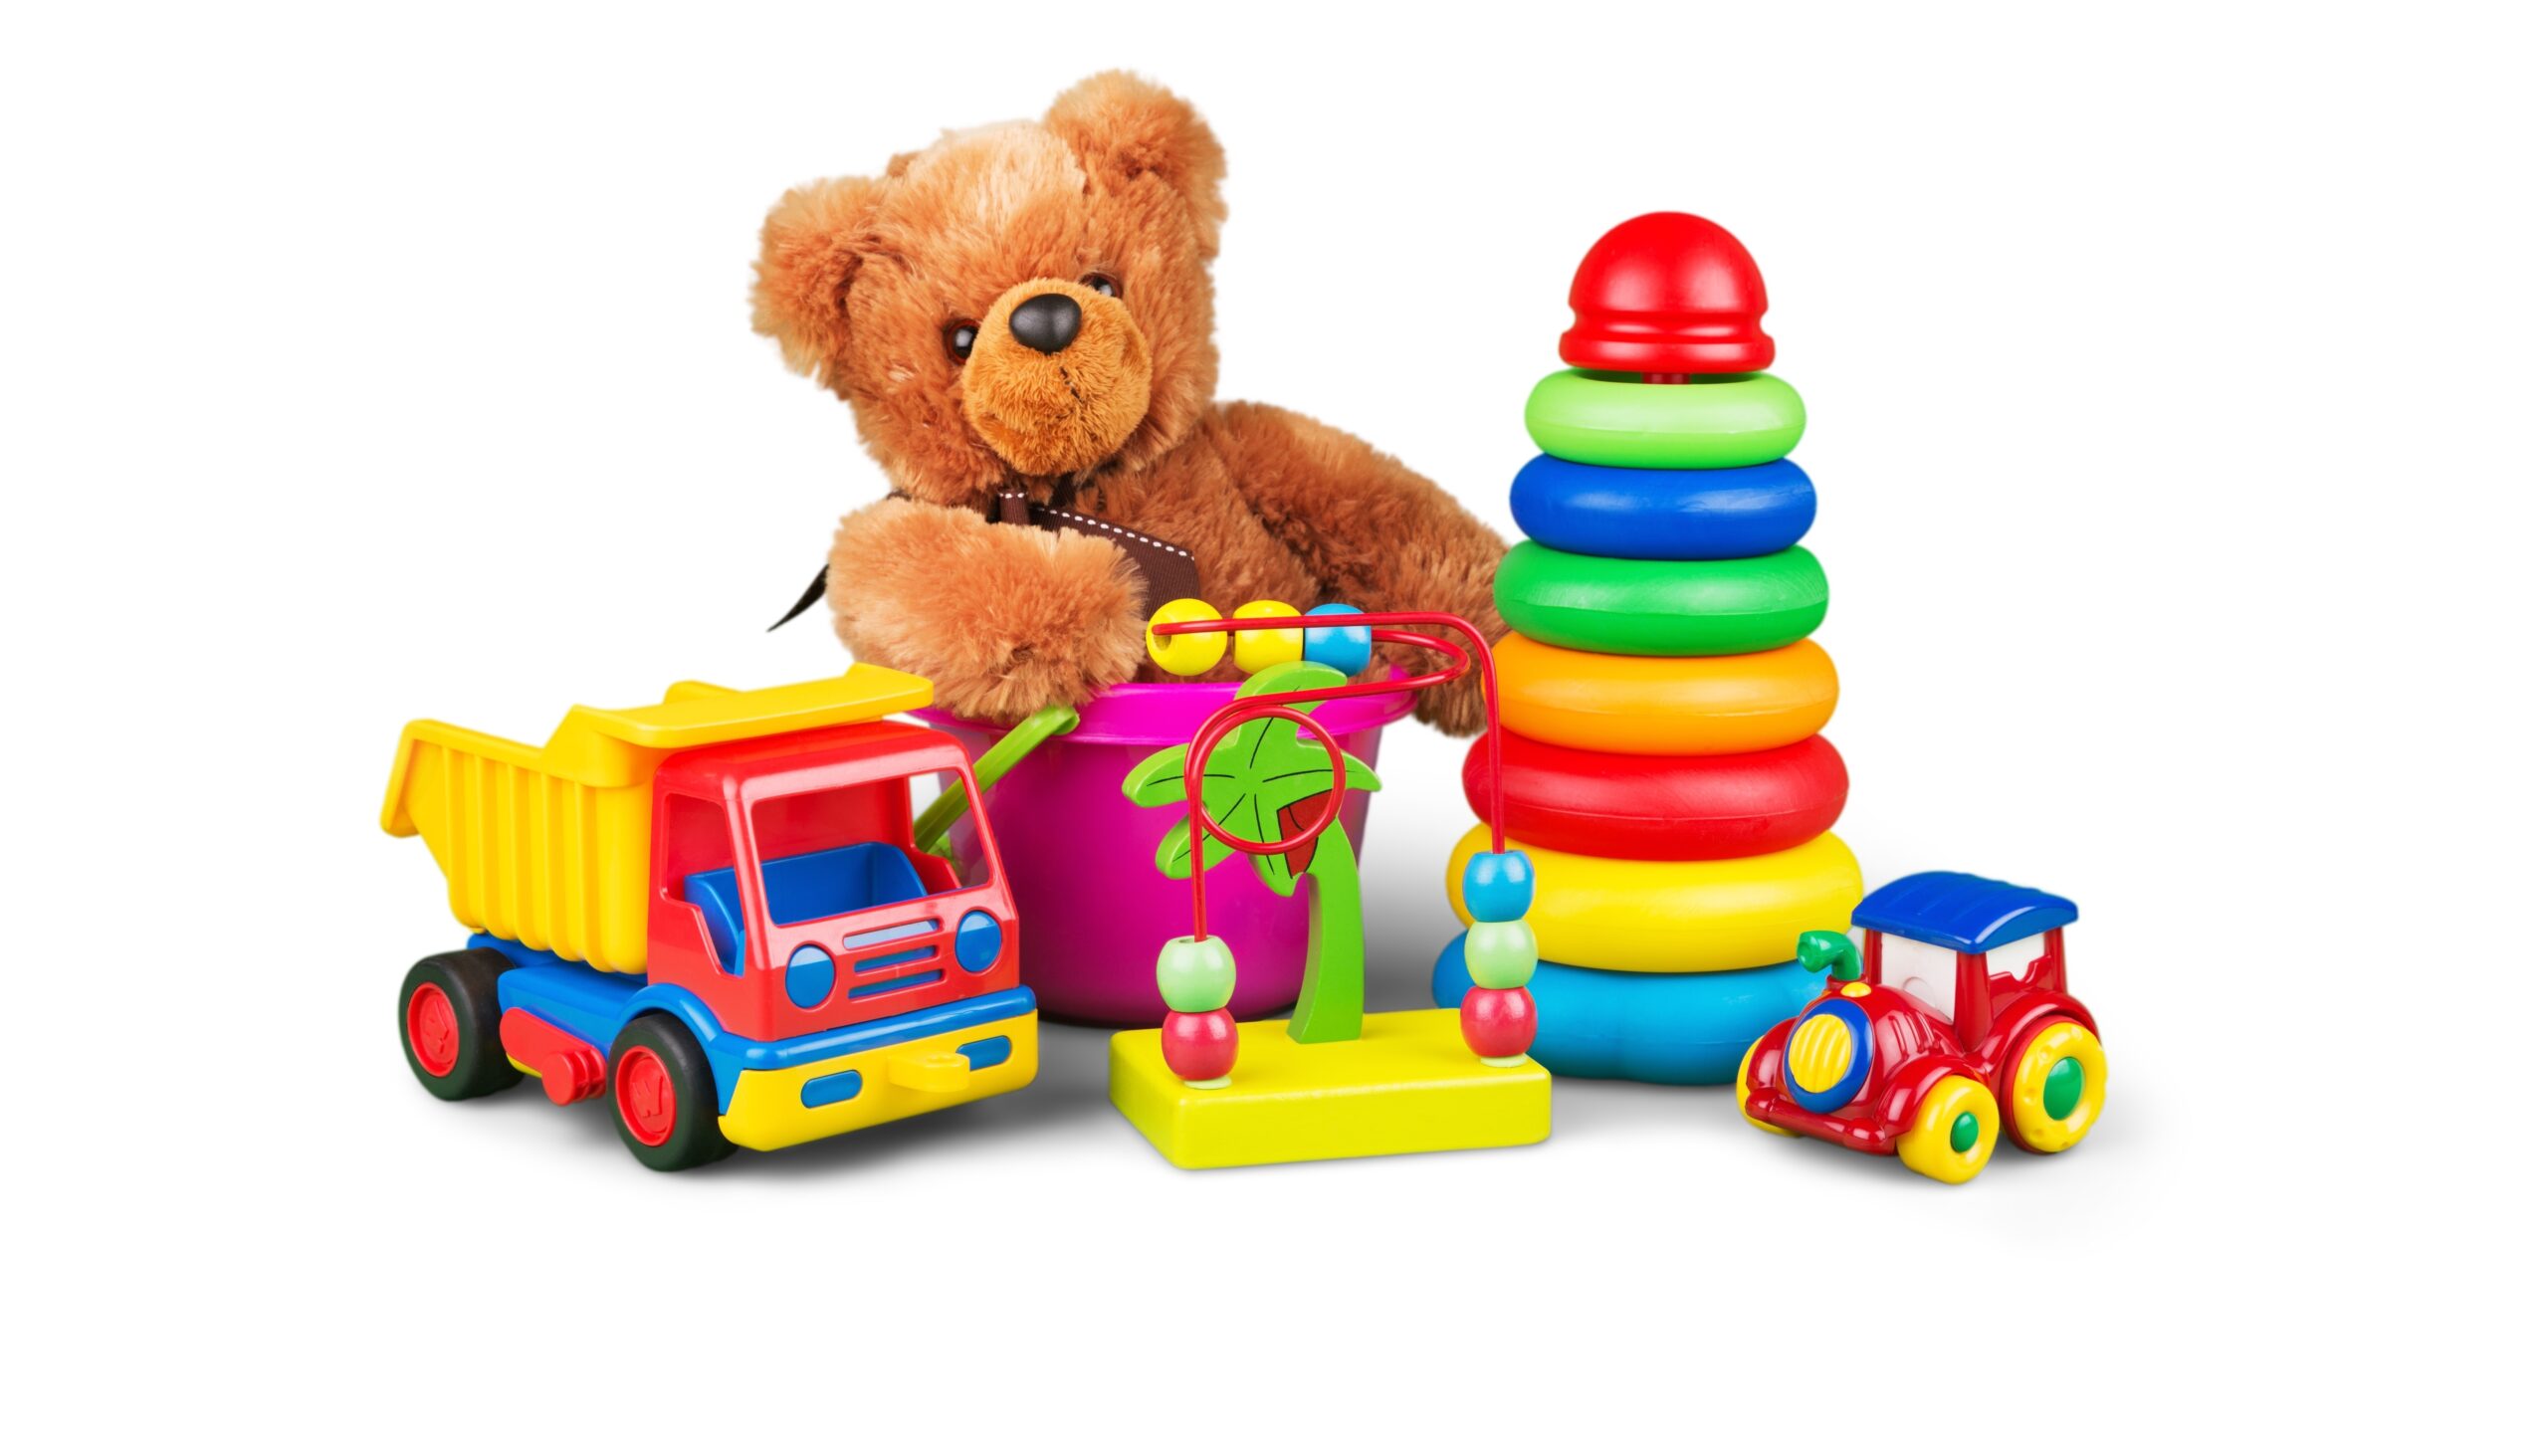 toy truck, teddy bear, and other kids toys